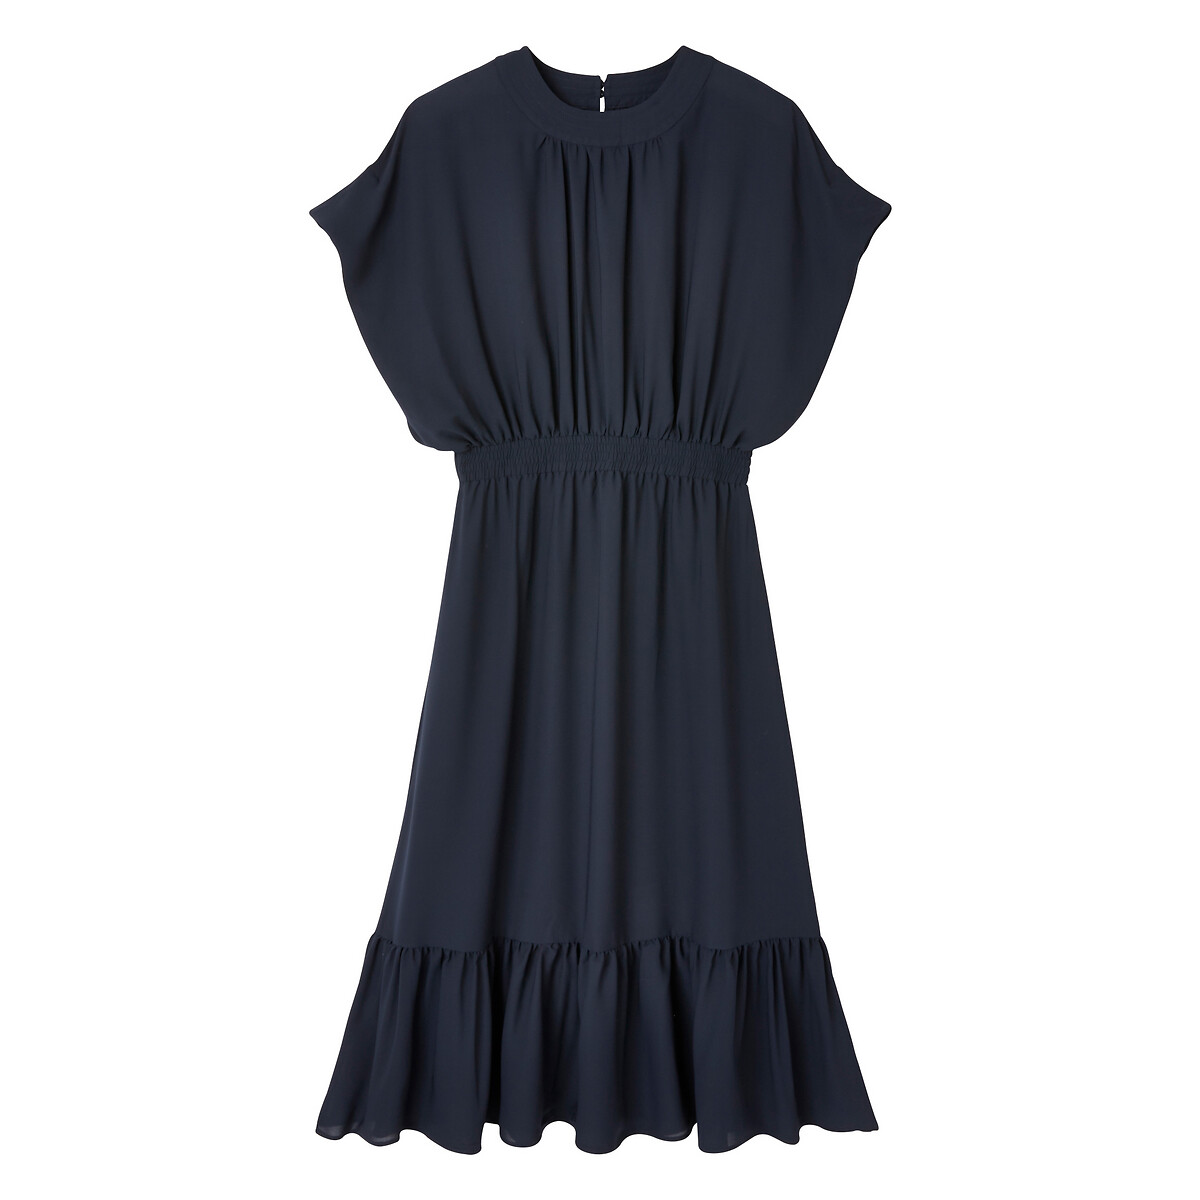 Recycled ruffle midi dress with short sleeves, navy blue, La Redoute ...